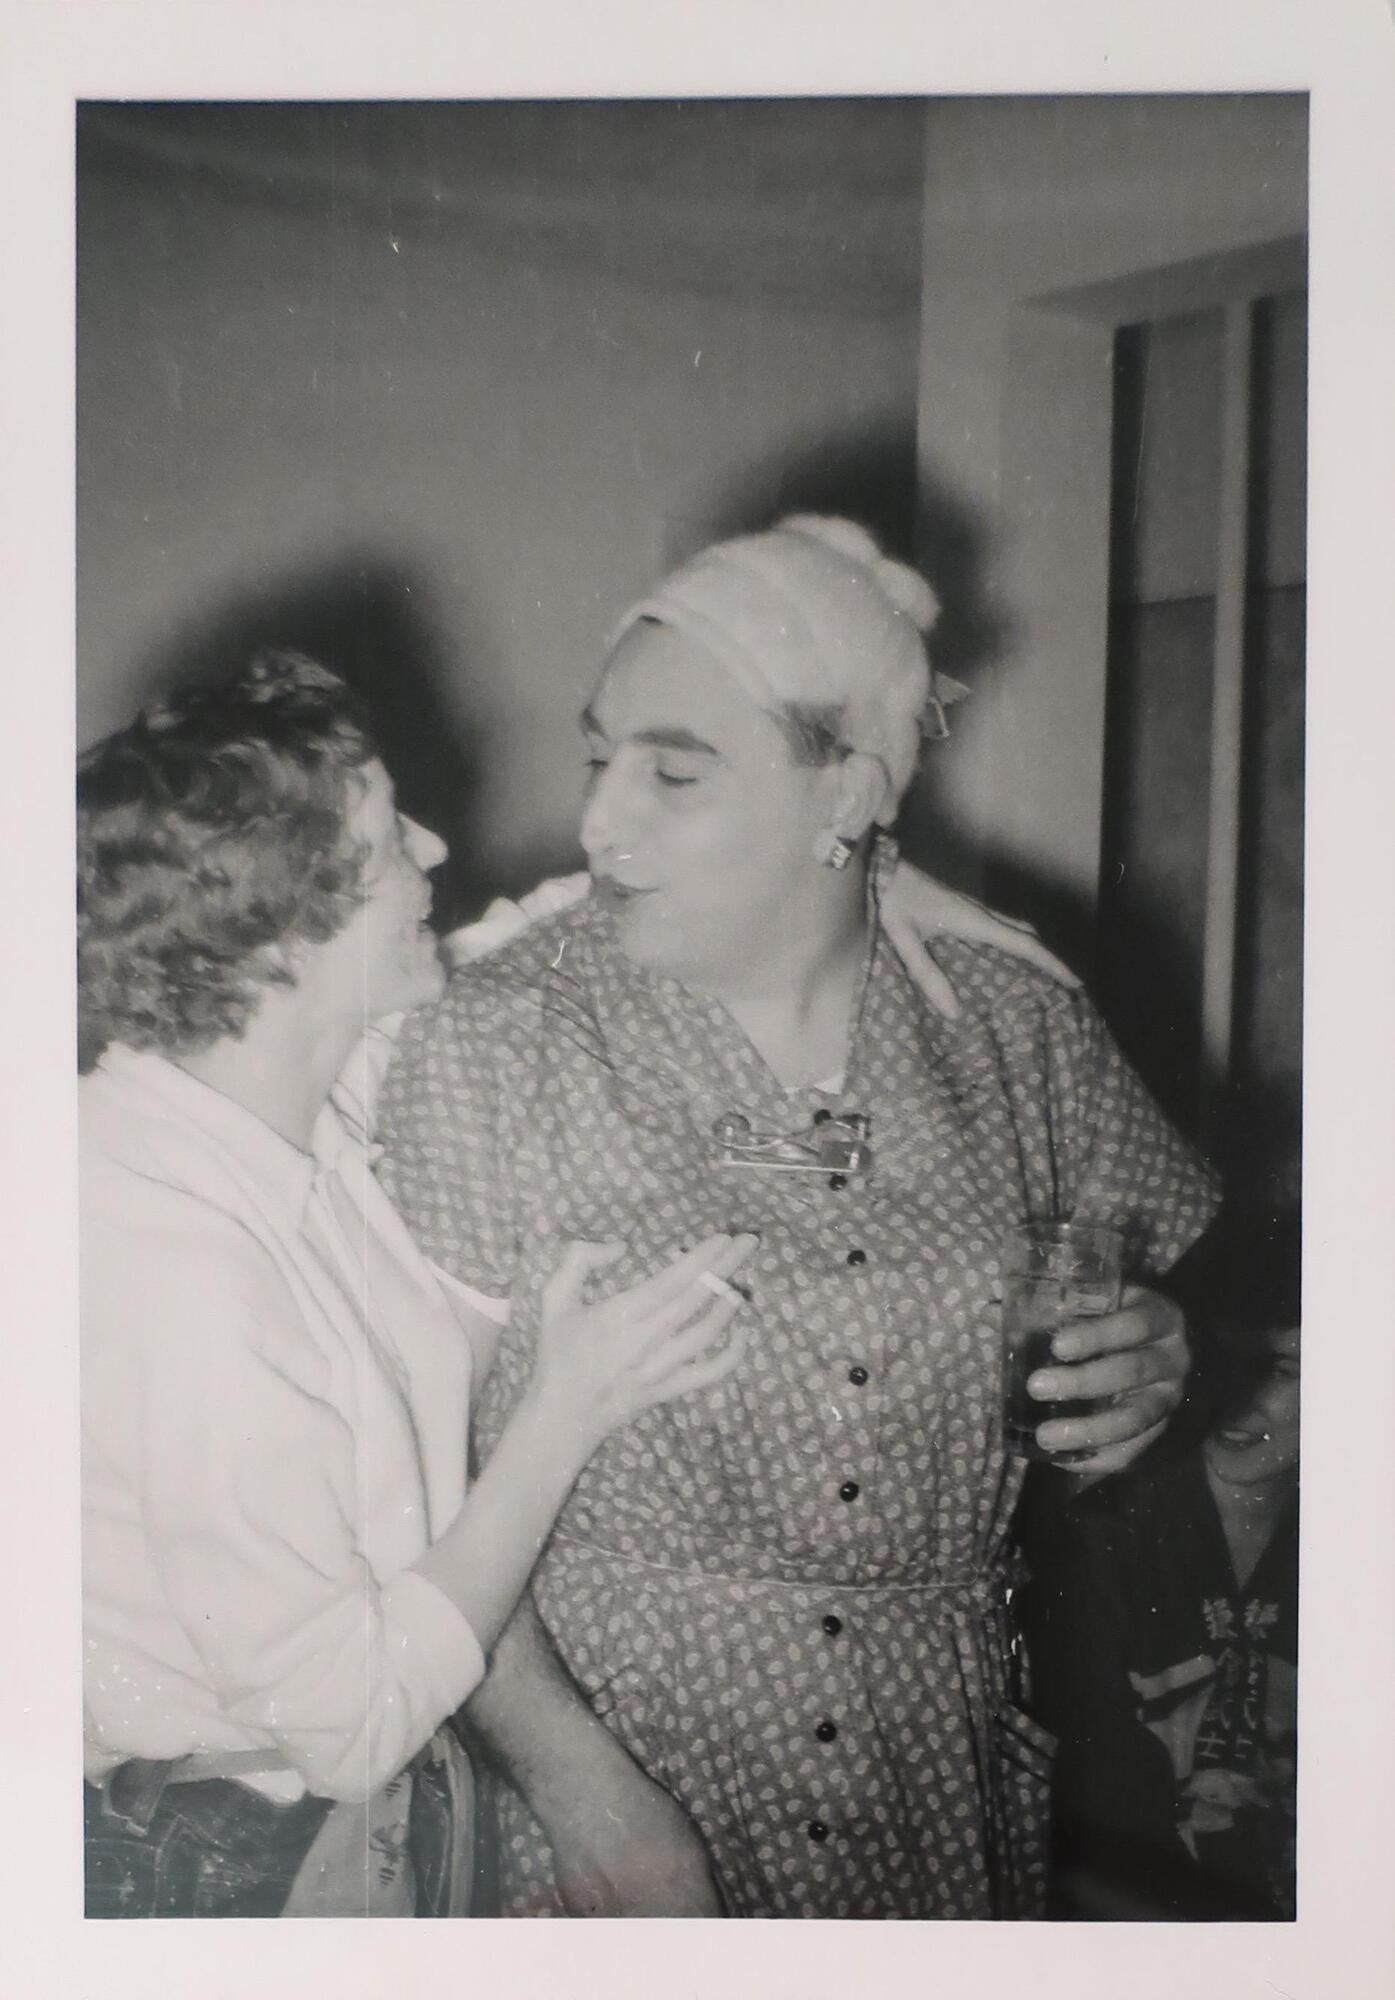 Two people talking to each other, one wearing a print dress with their hair wrapped and the other with a short haircut and white collared shirt. The person in the collared shirt has their left arm around the person in the dress and holds a cigarette in their right hand.